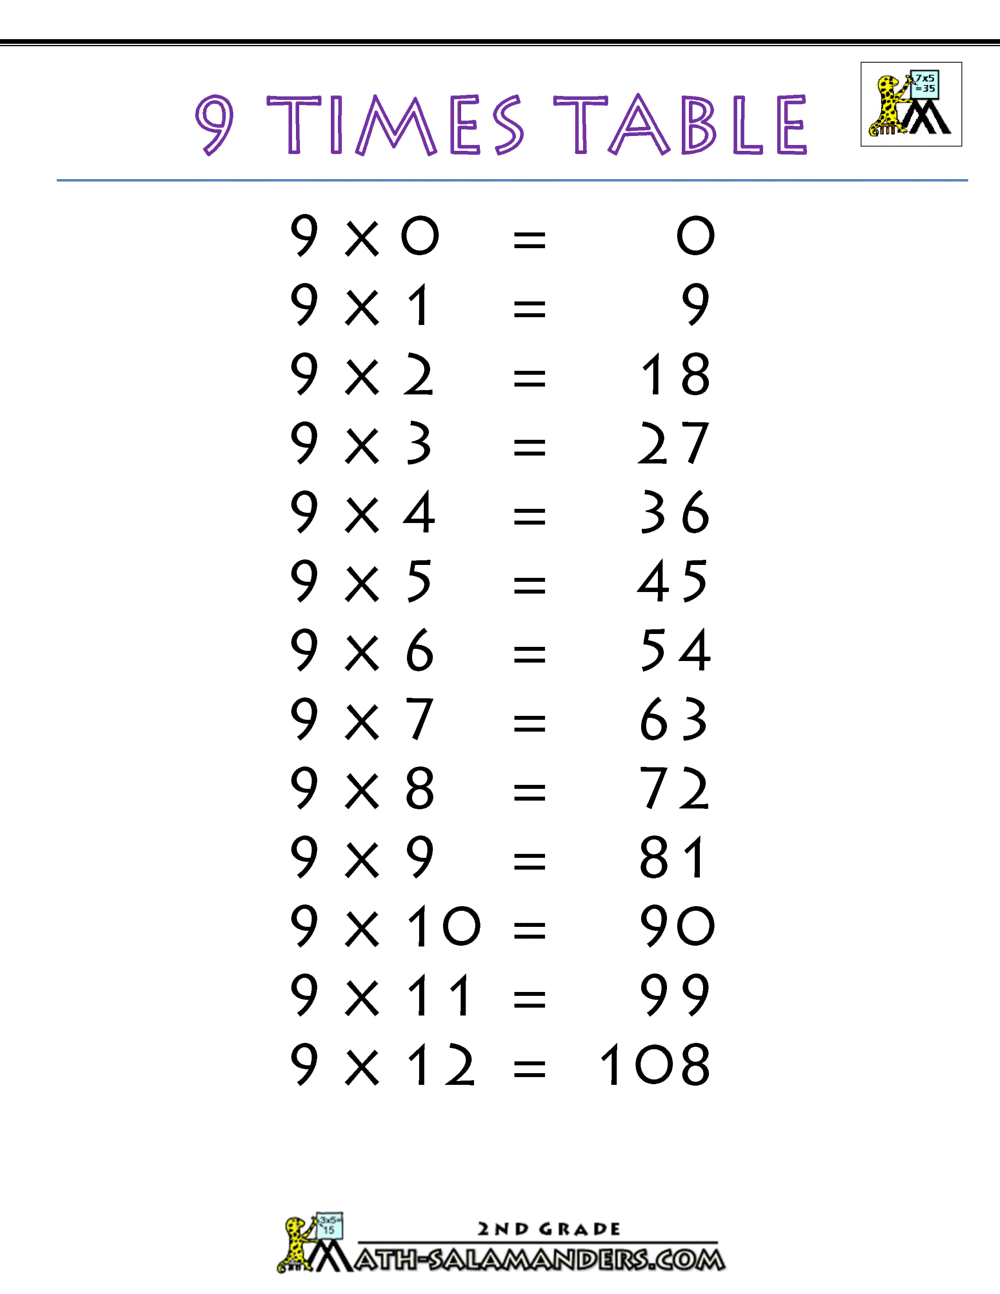 multiplication-9-times-table-worksheets-101-activity